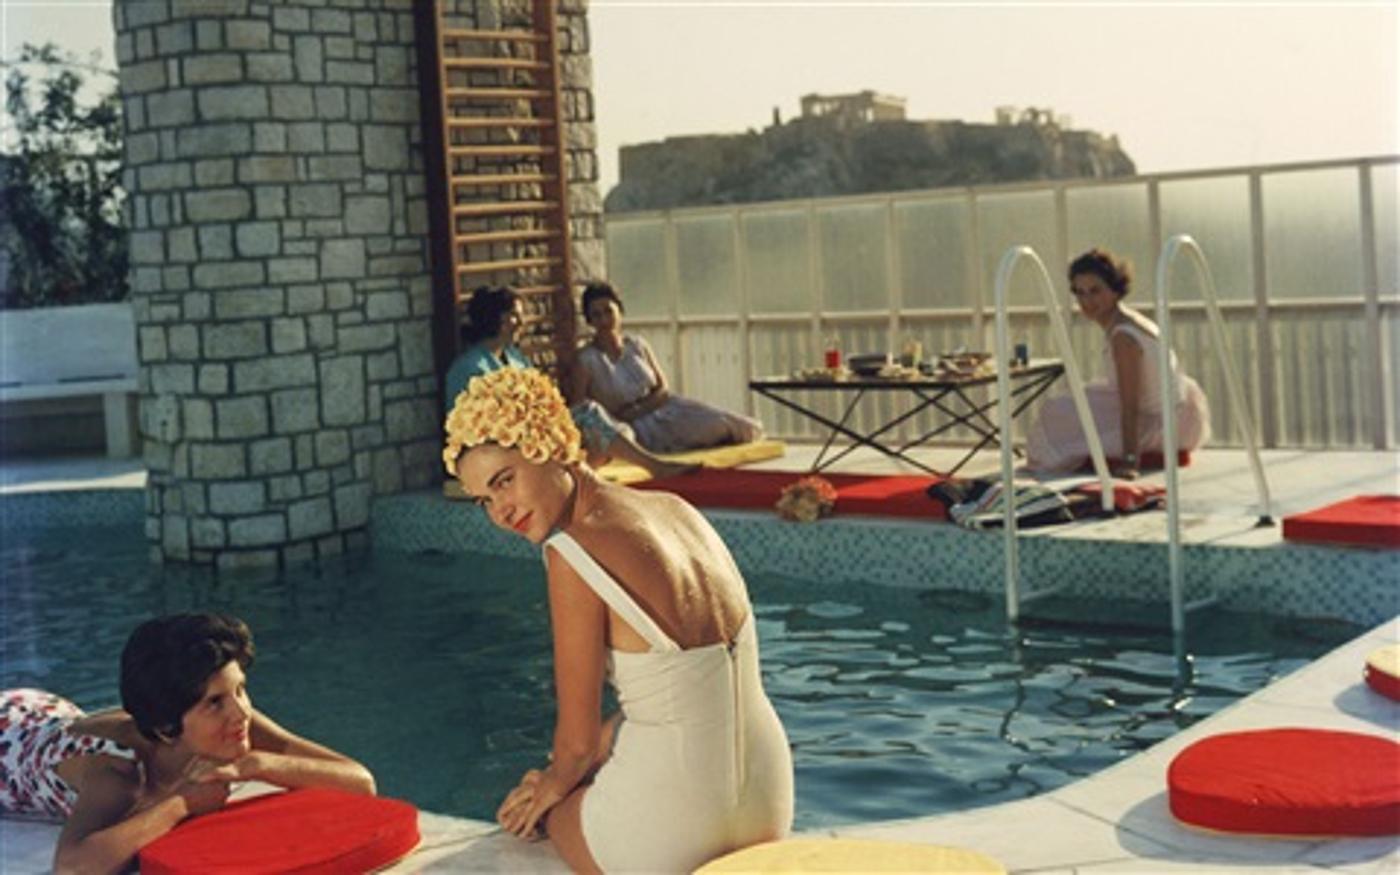 Penthouse Pool
1961
by Slim Aarons

printed 2023
Slim Aarons Limited Estate Edition

 Young women by the Canellopoulos penthouse pool, Athens, July 1961

unframed
c type
Limited to 150 prints only – regardless of paper size

blind embossed Slim